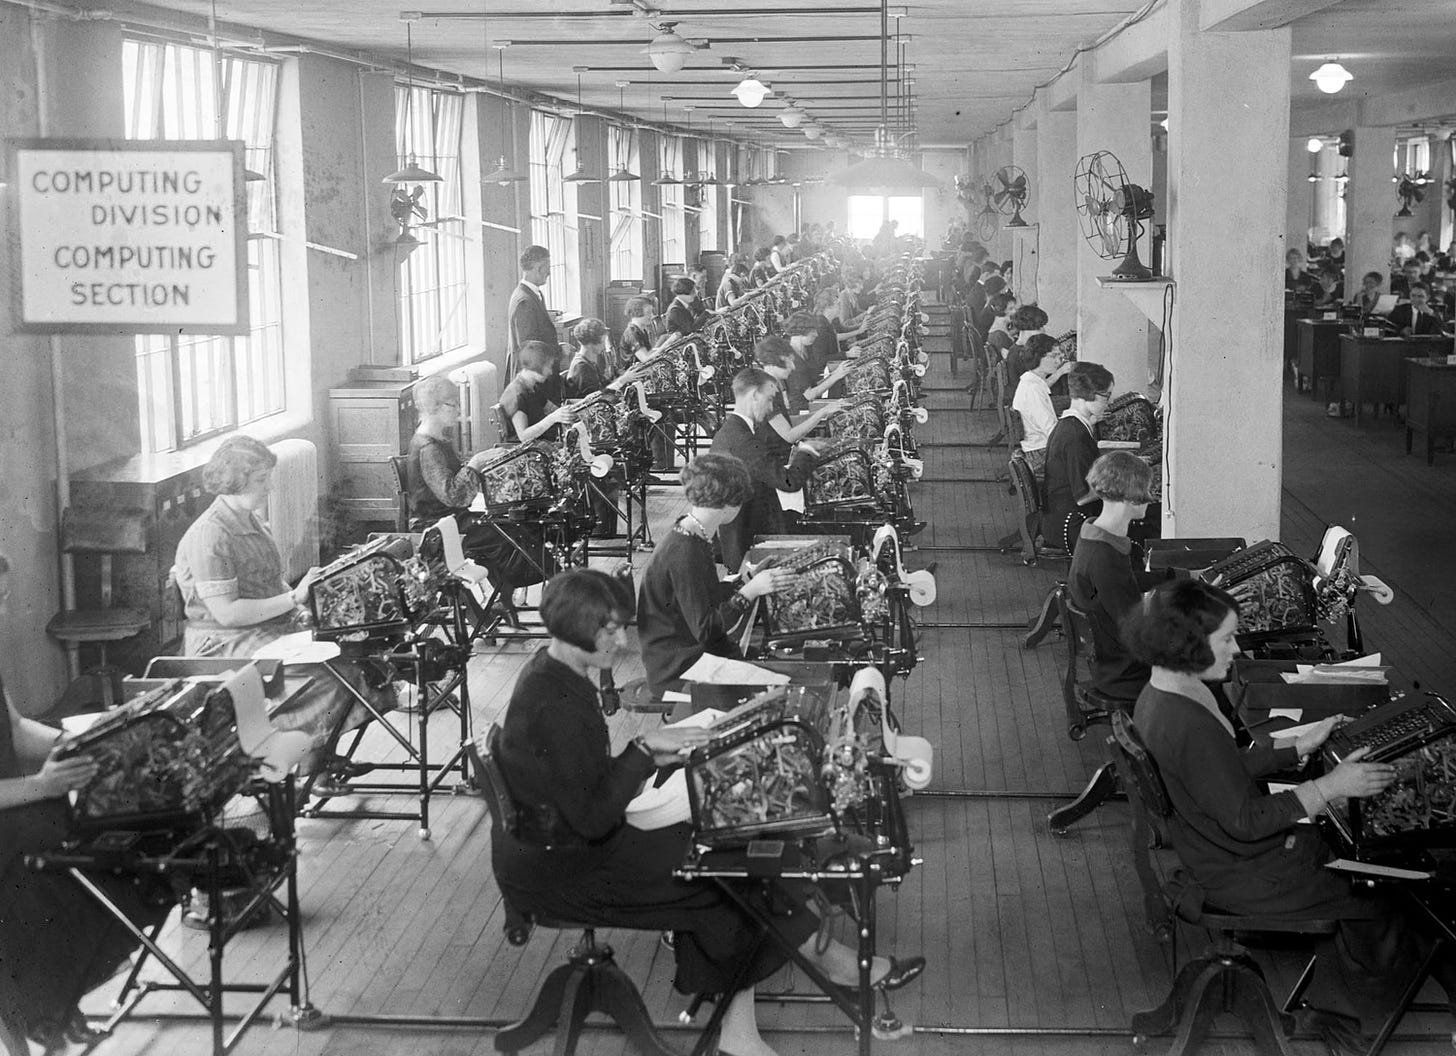 U.S. government clerks use new calculating machines to determine the bonuses for World War I veterans, following the passage of the 1924 World War Adjusted Compensation Act, or "Bonus Act," compensating veterans for wages lost during their service.